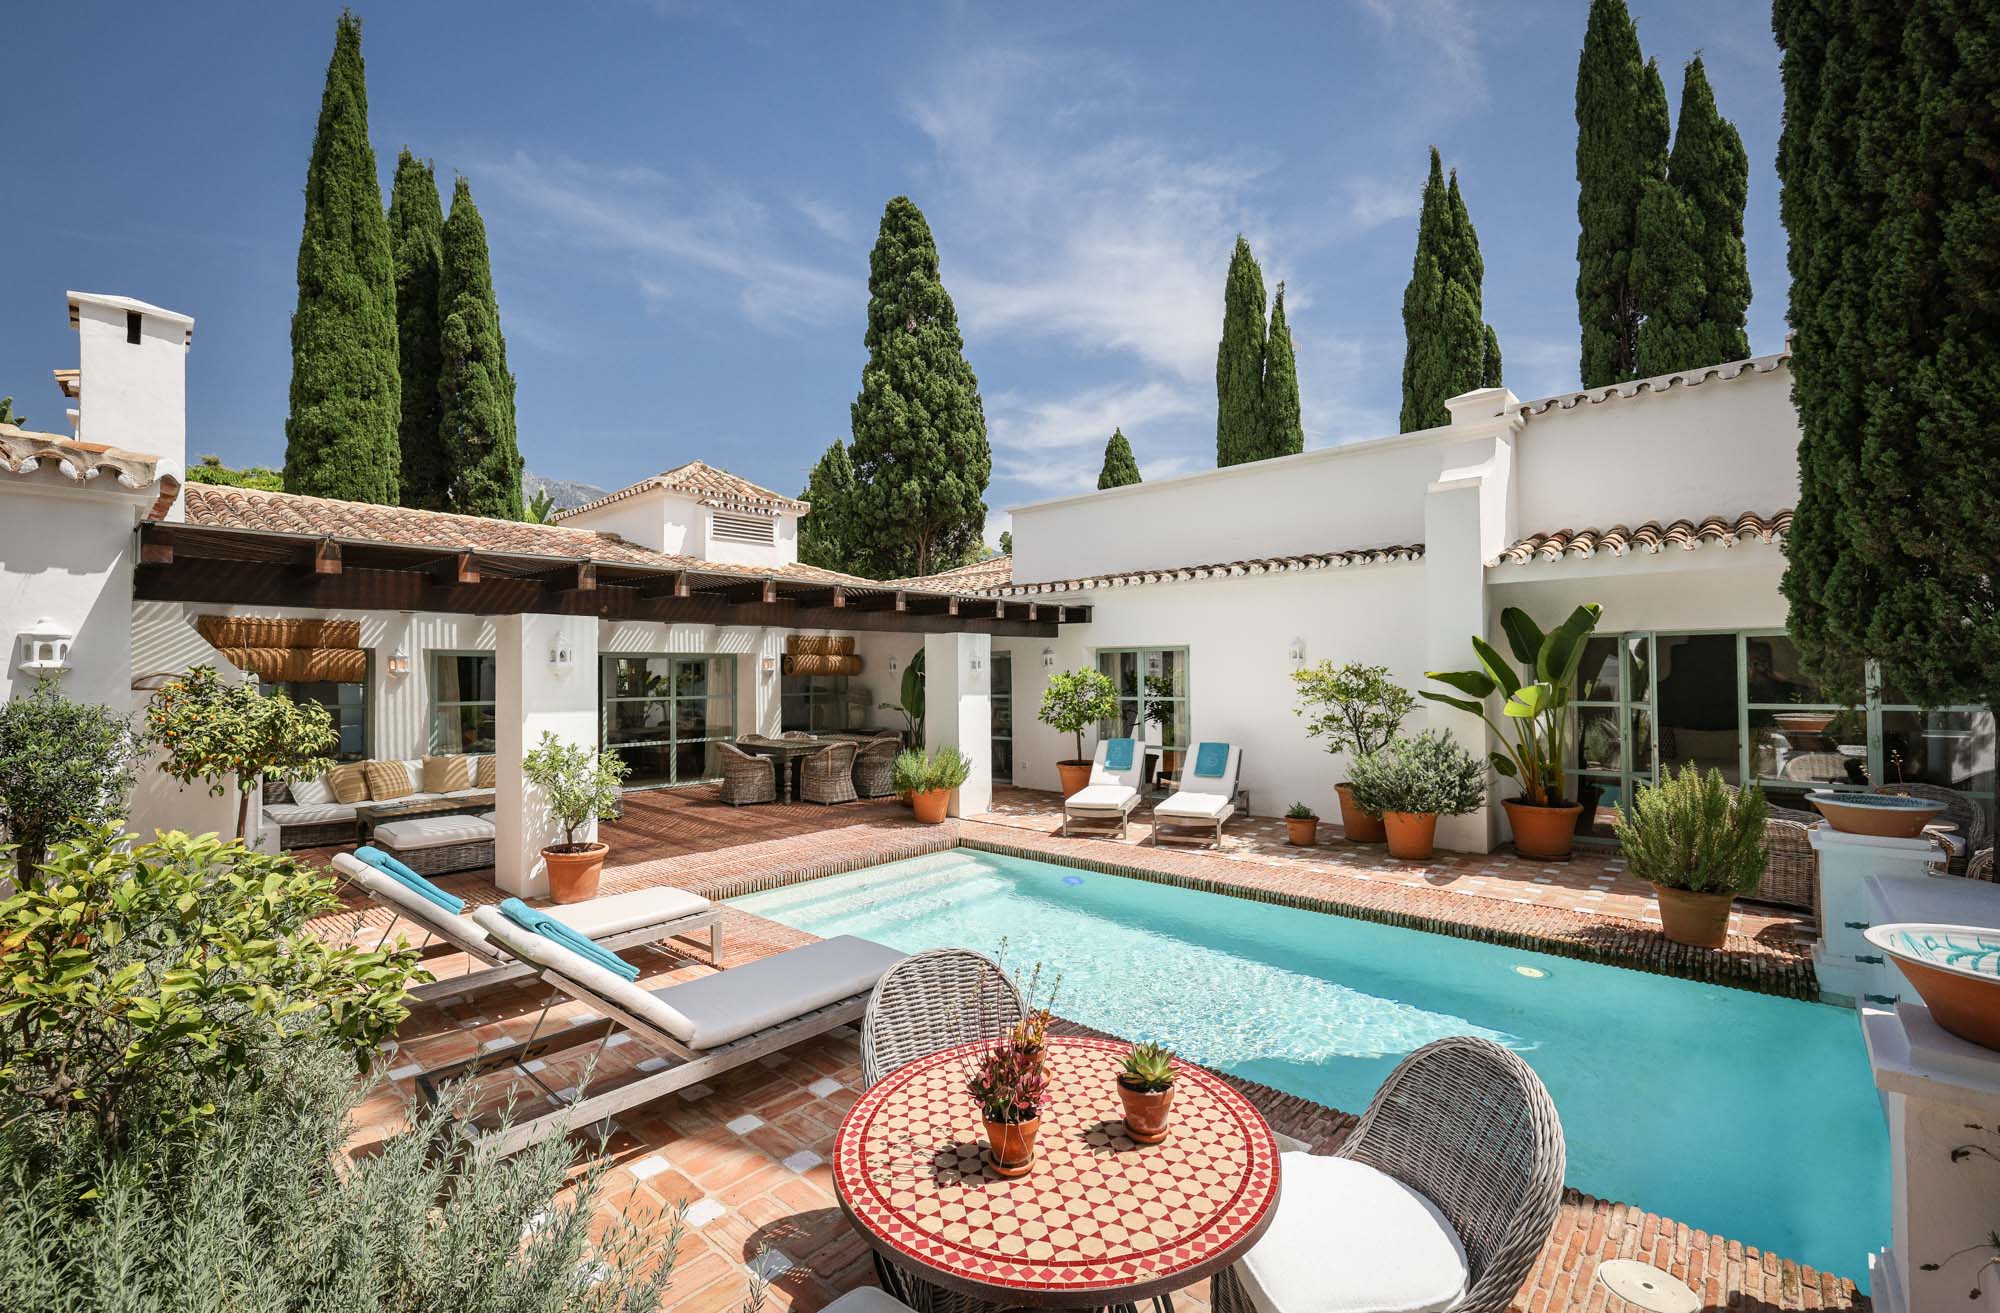 Pool and central courtyard of Villa Romero in Marbella